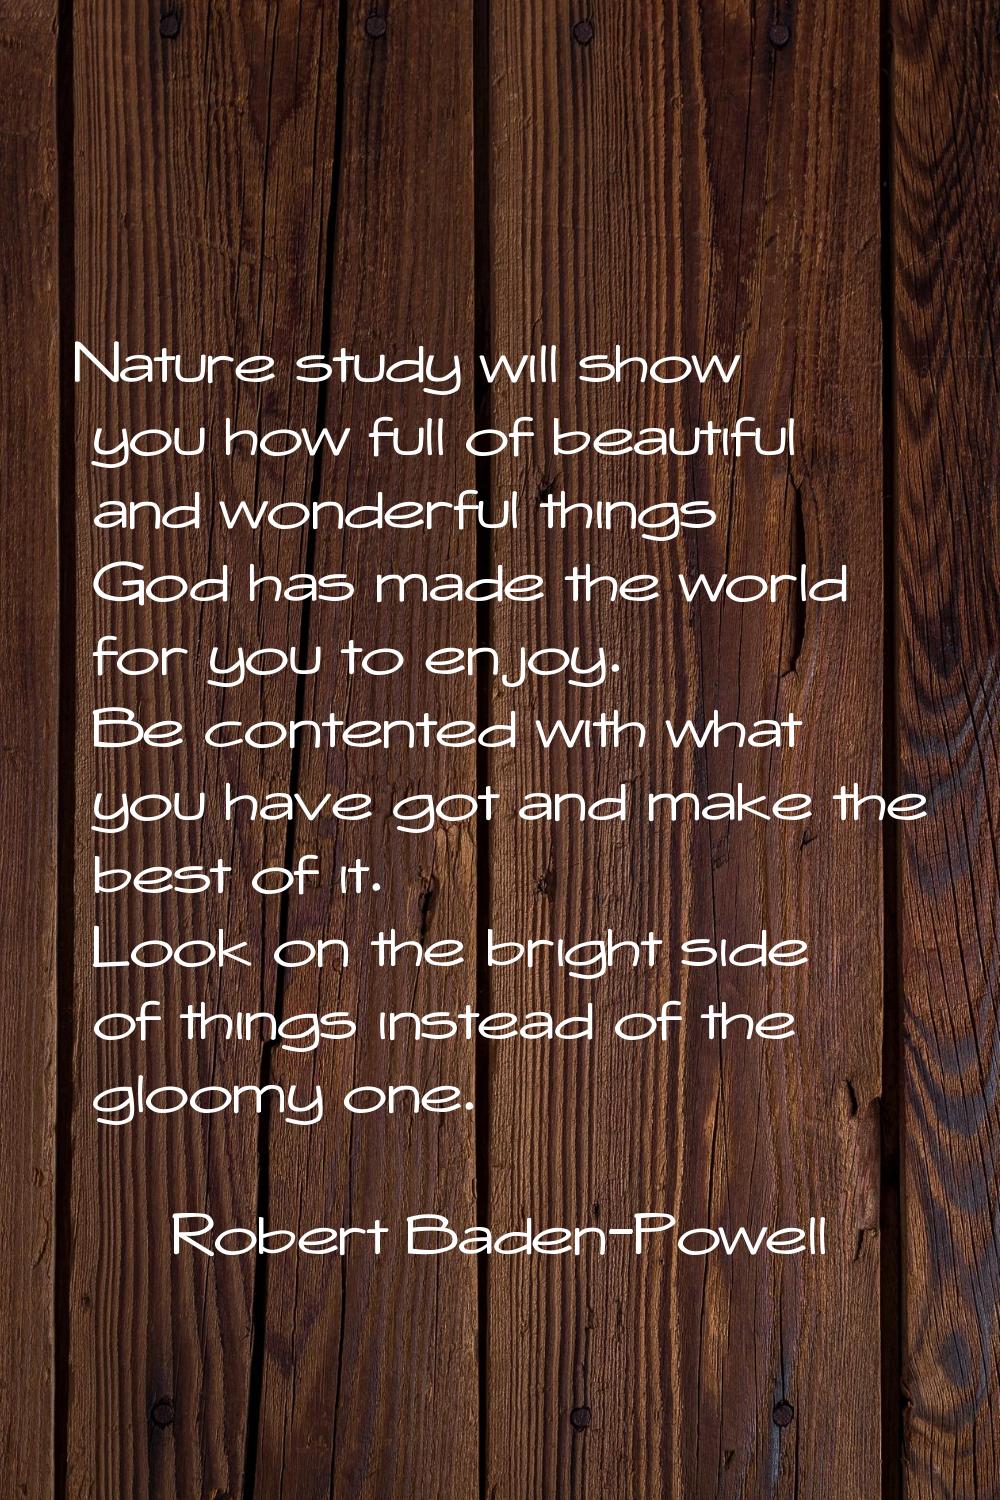 Nature study will show you how full of beautiful and wonderful things God has made the world for yo